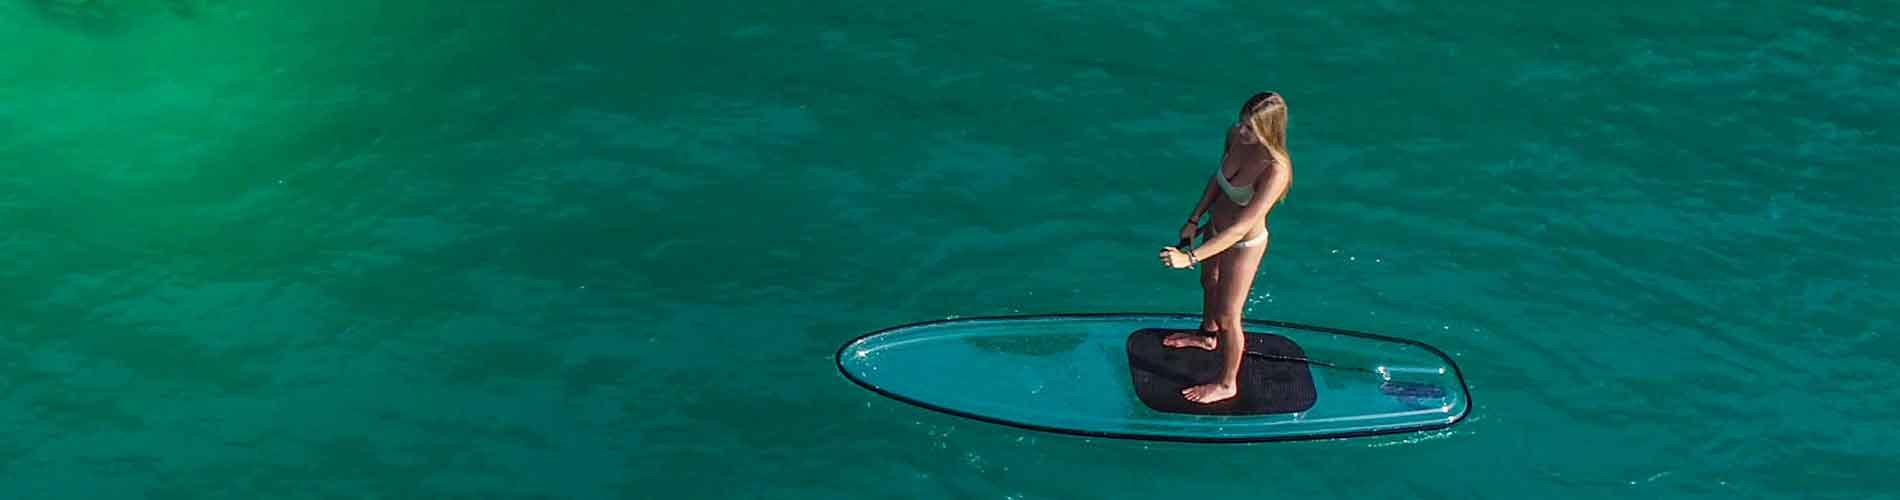 Stand up Paddle board transparente